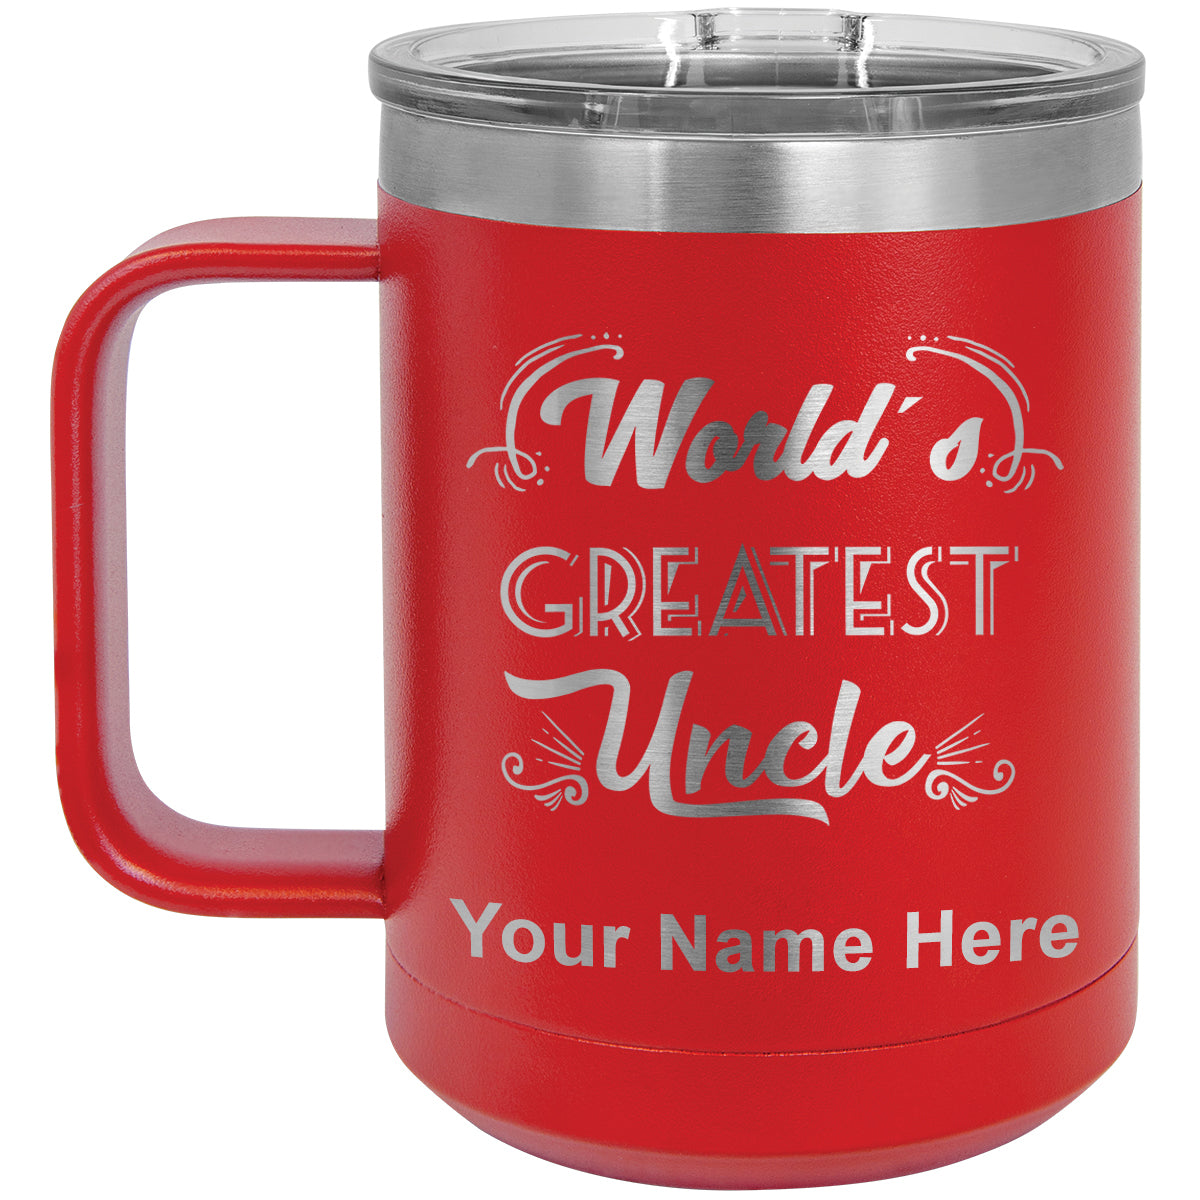 15oz Vacuum Insulated Coffee Mug, World's Greatest Uncle, Personalized Engraving Included